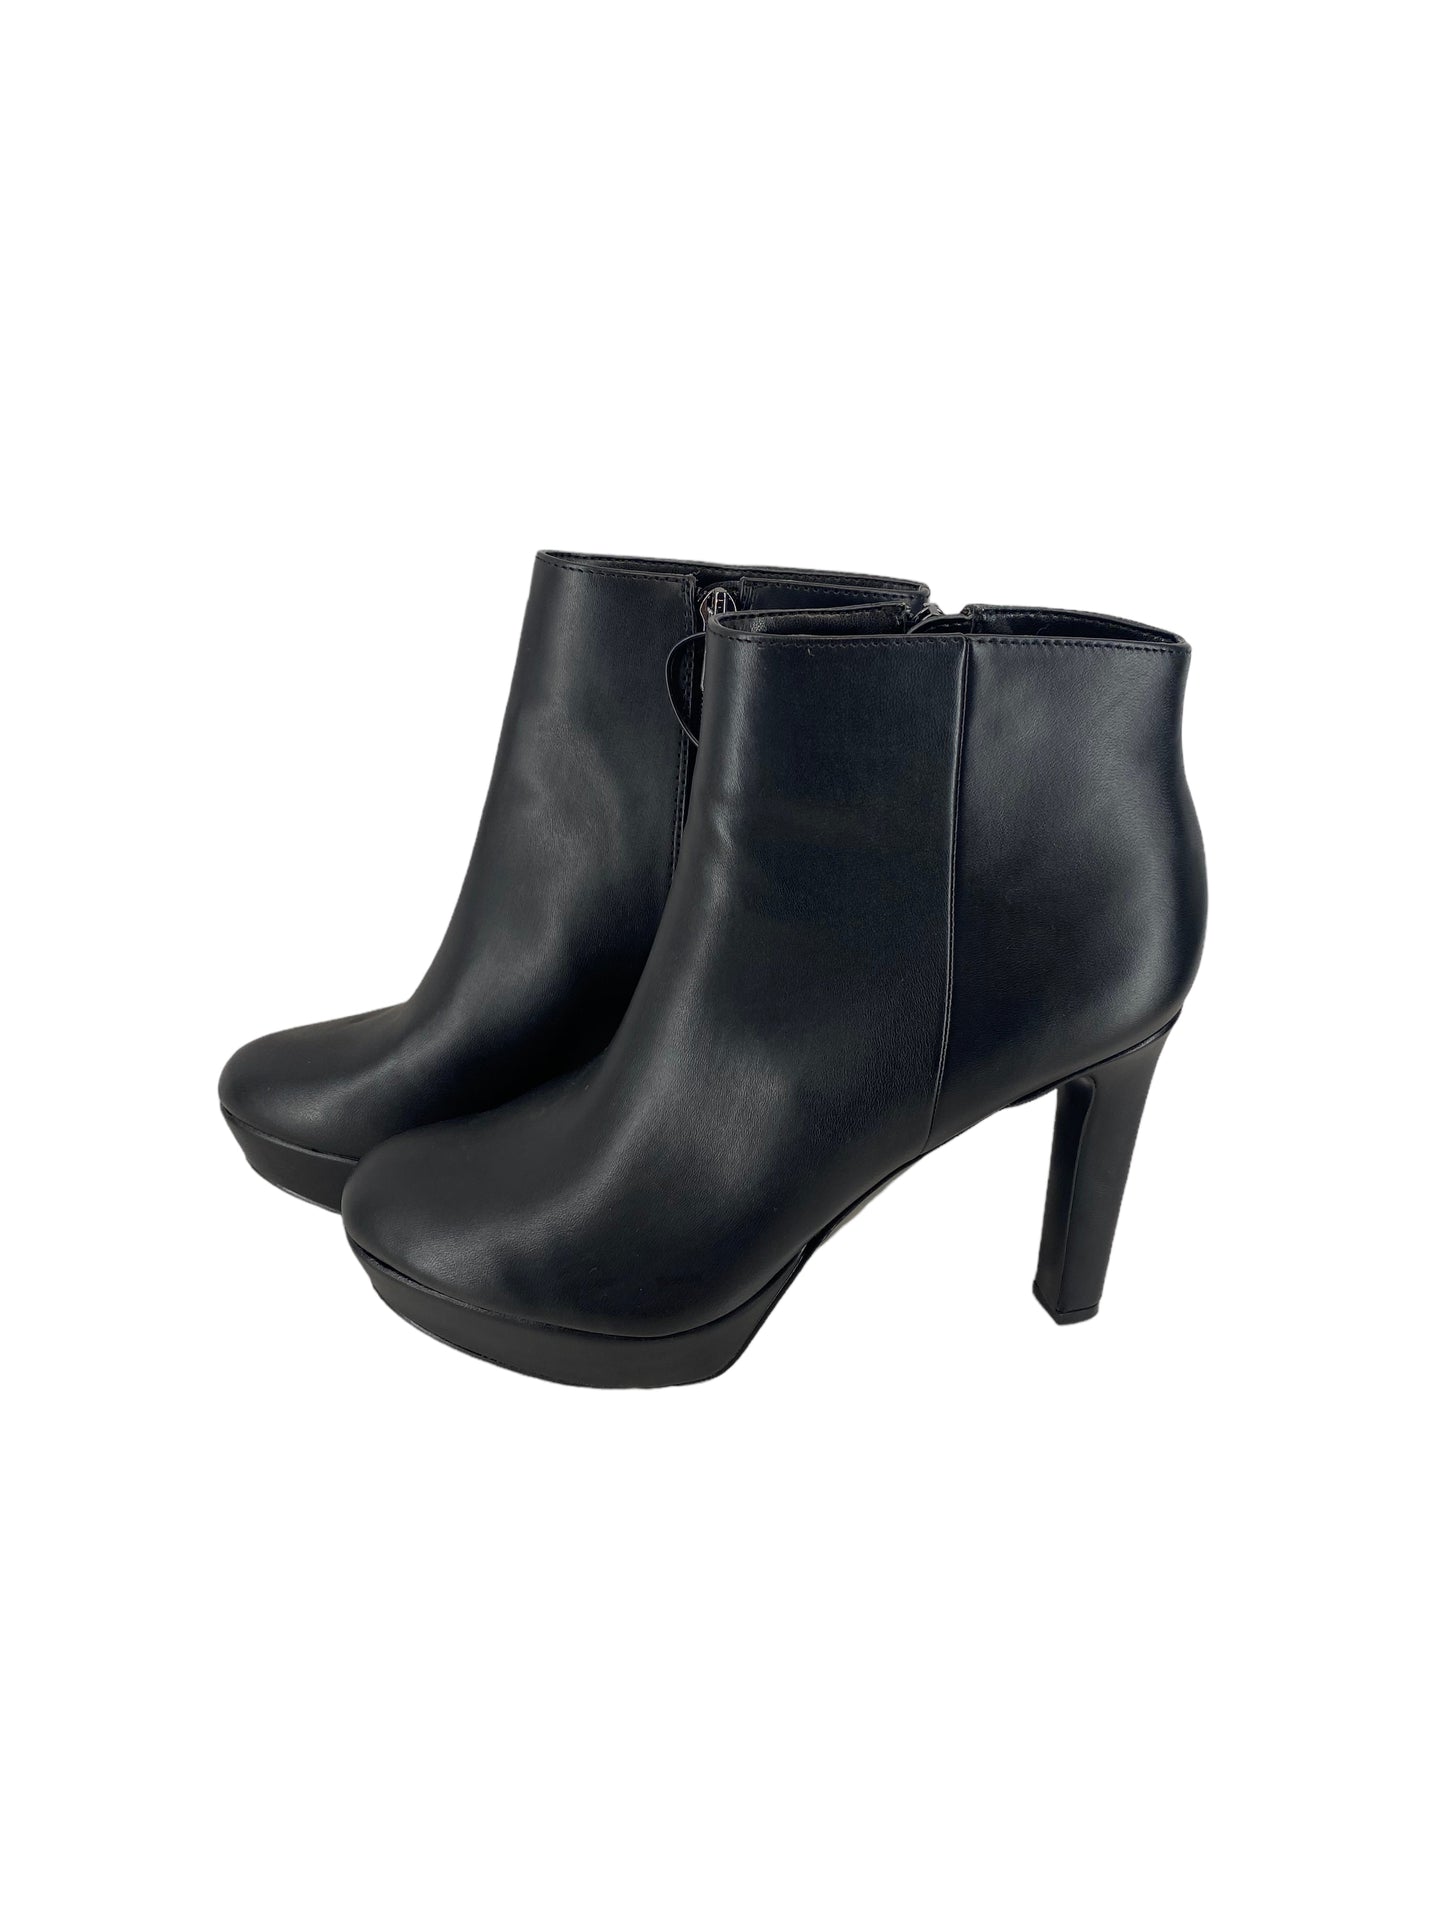 Boots Ankle Heels By Nine West  Size: 8.5